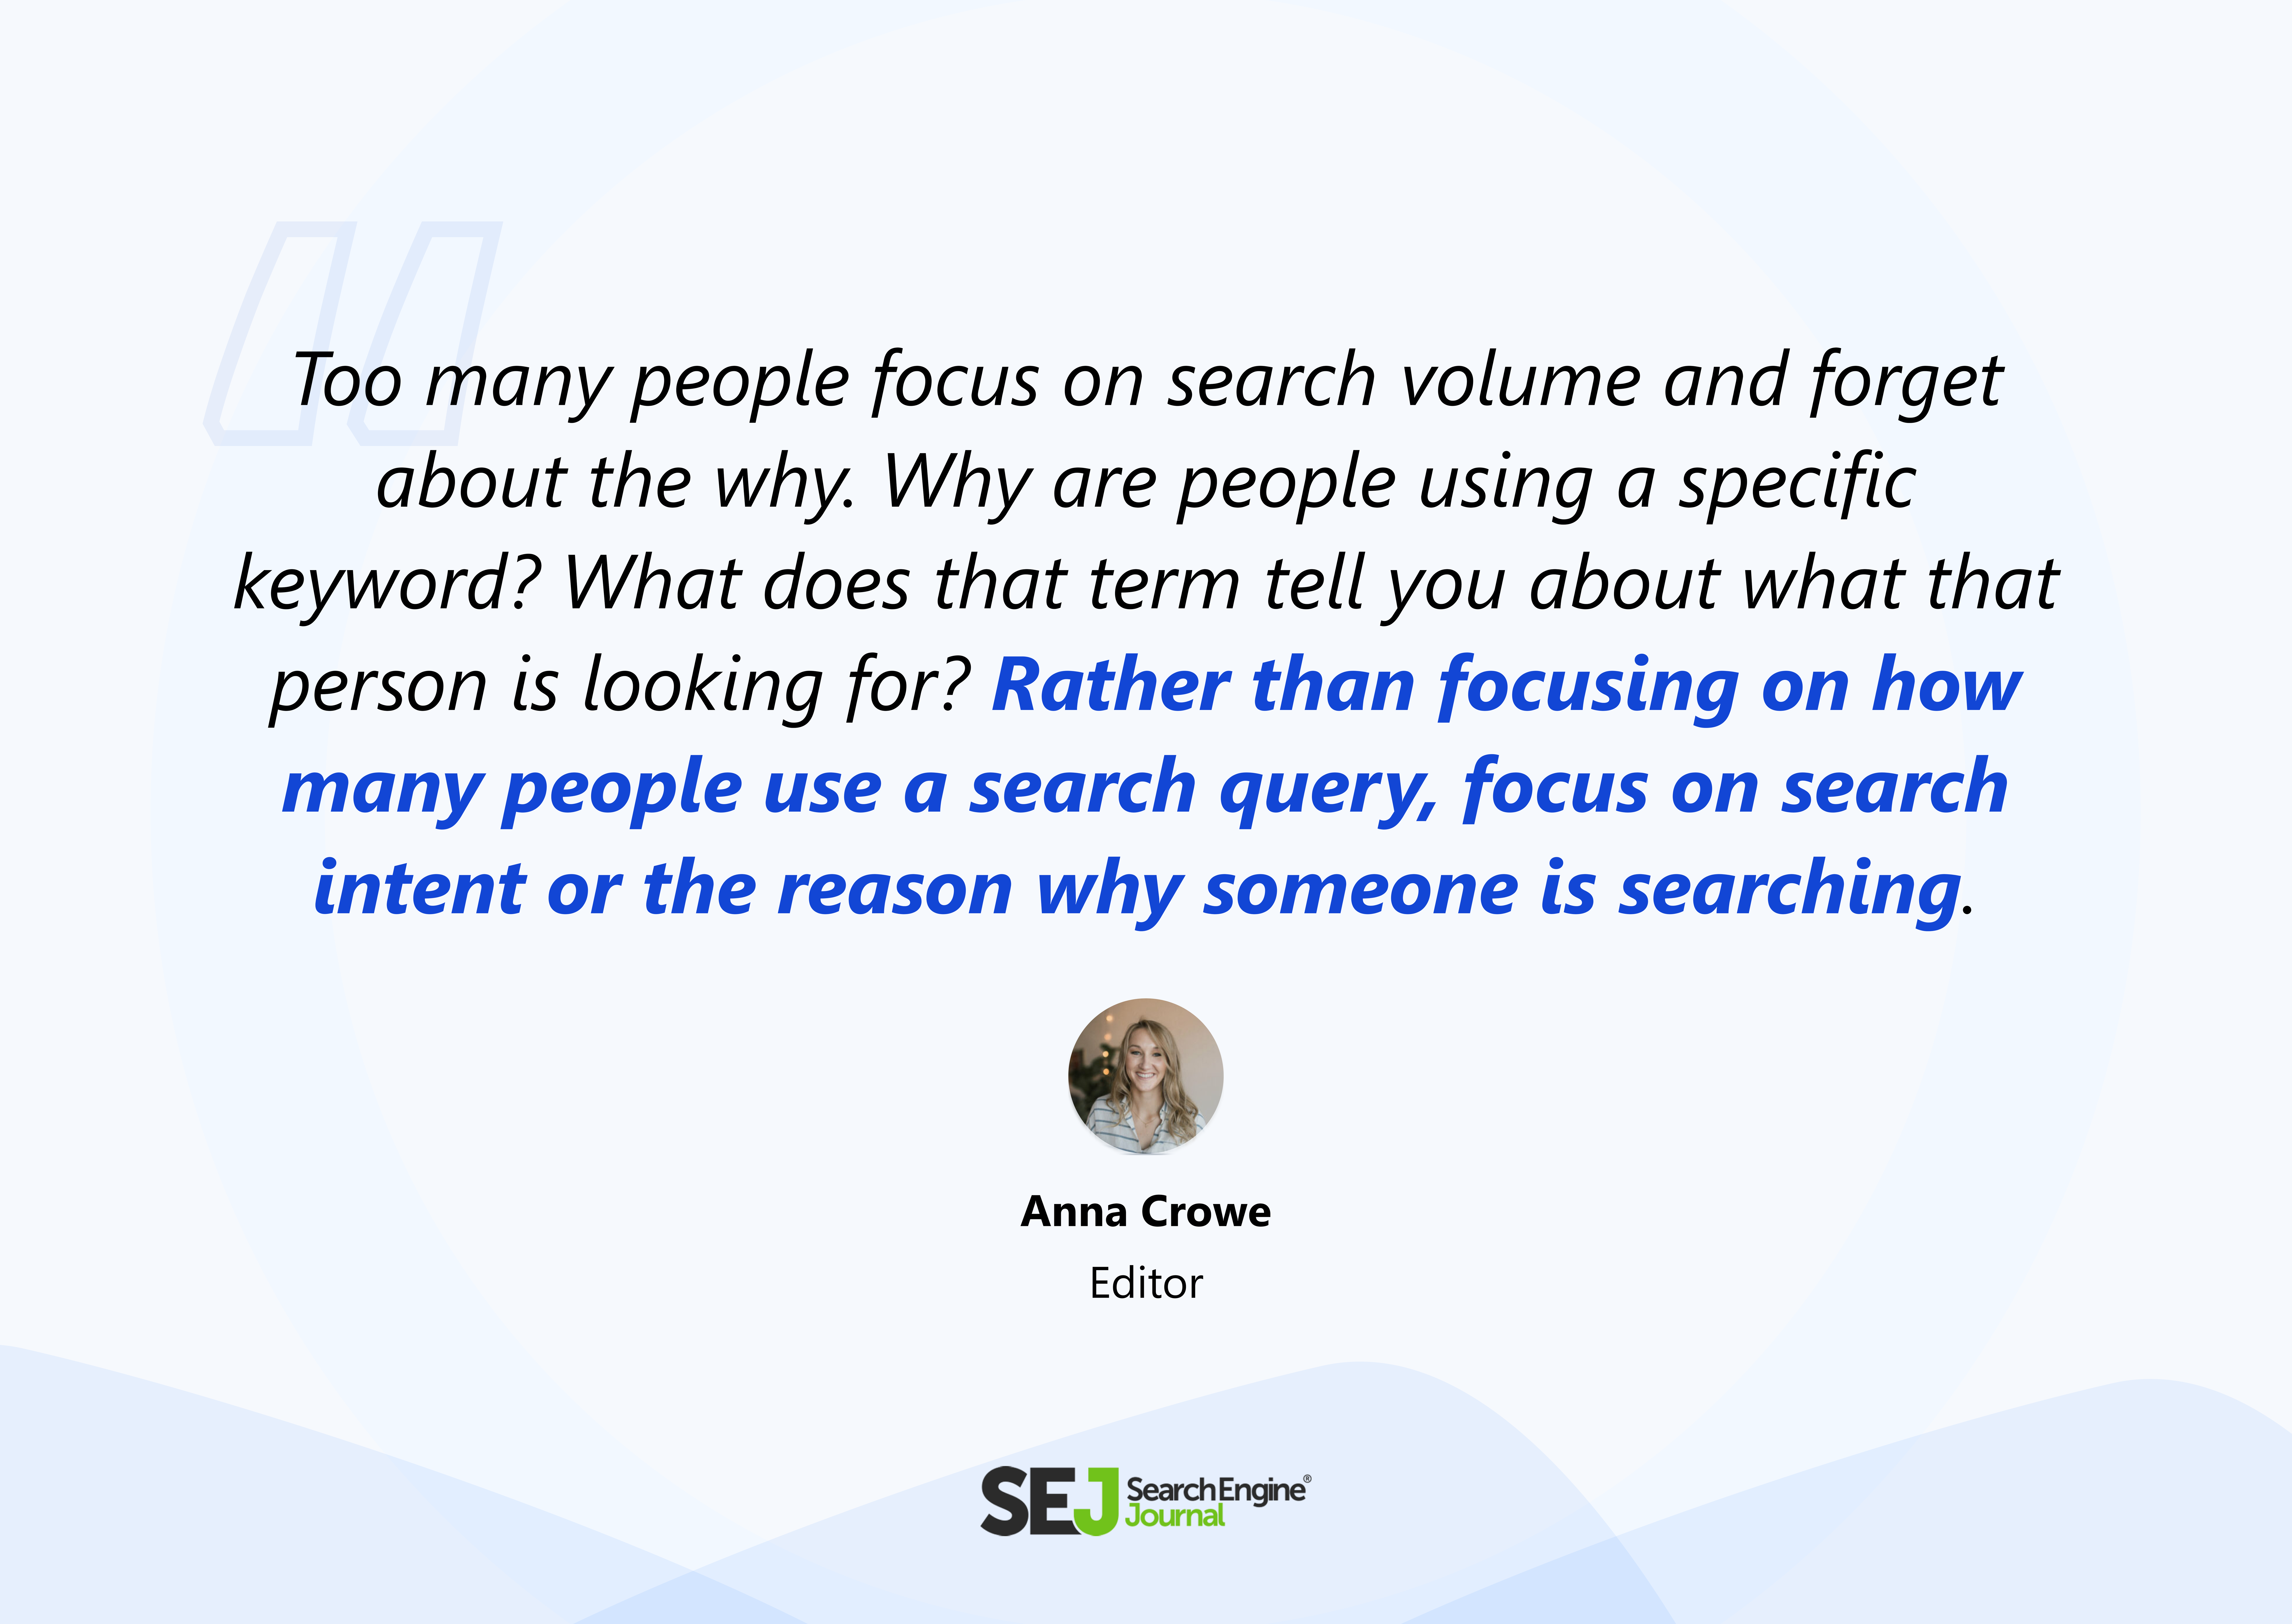 Focus On Search Intent And The Reason Behind Searching